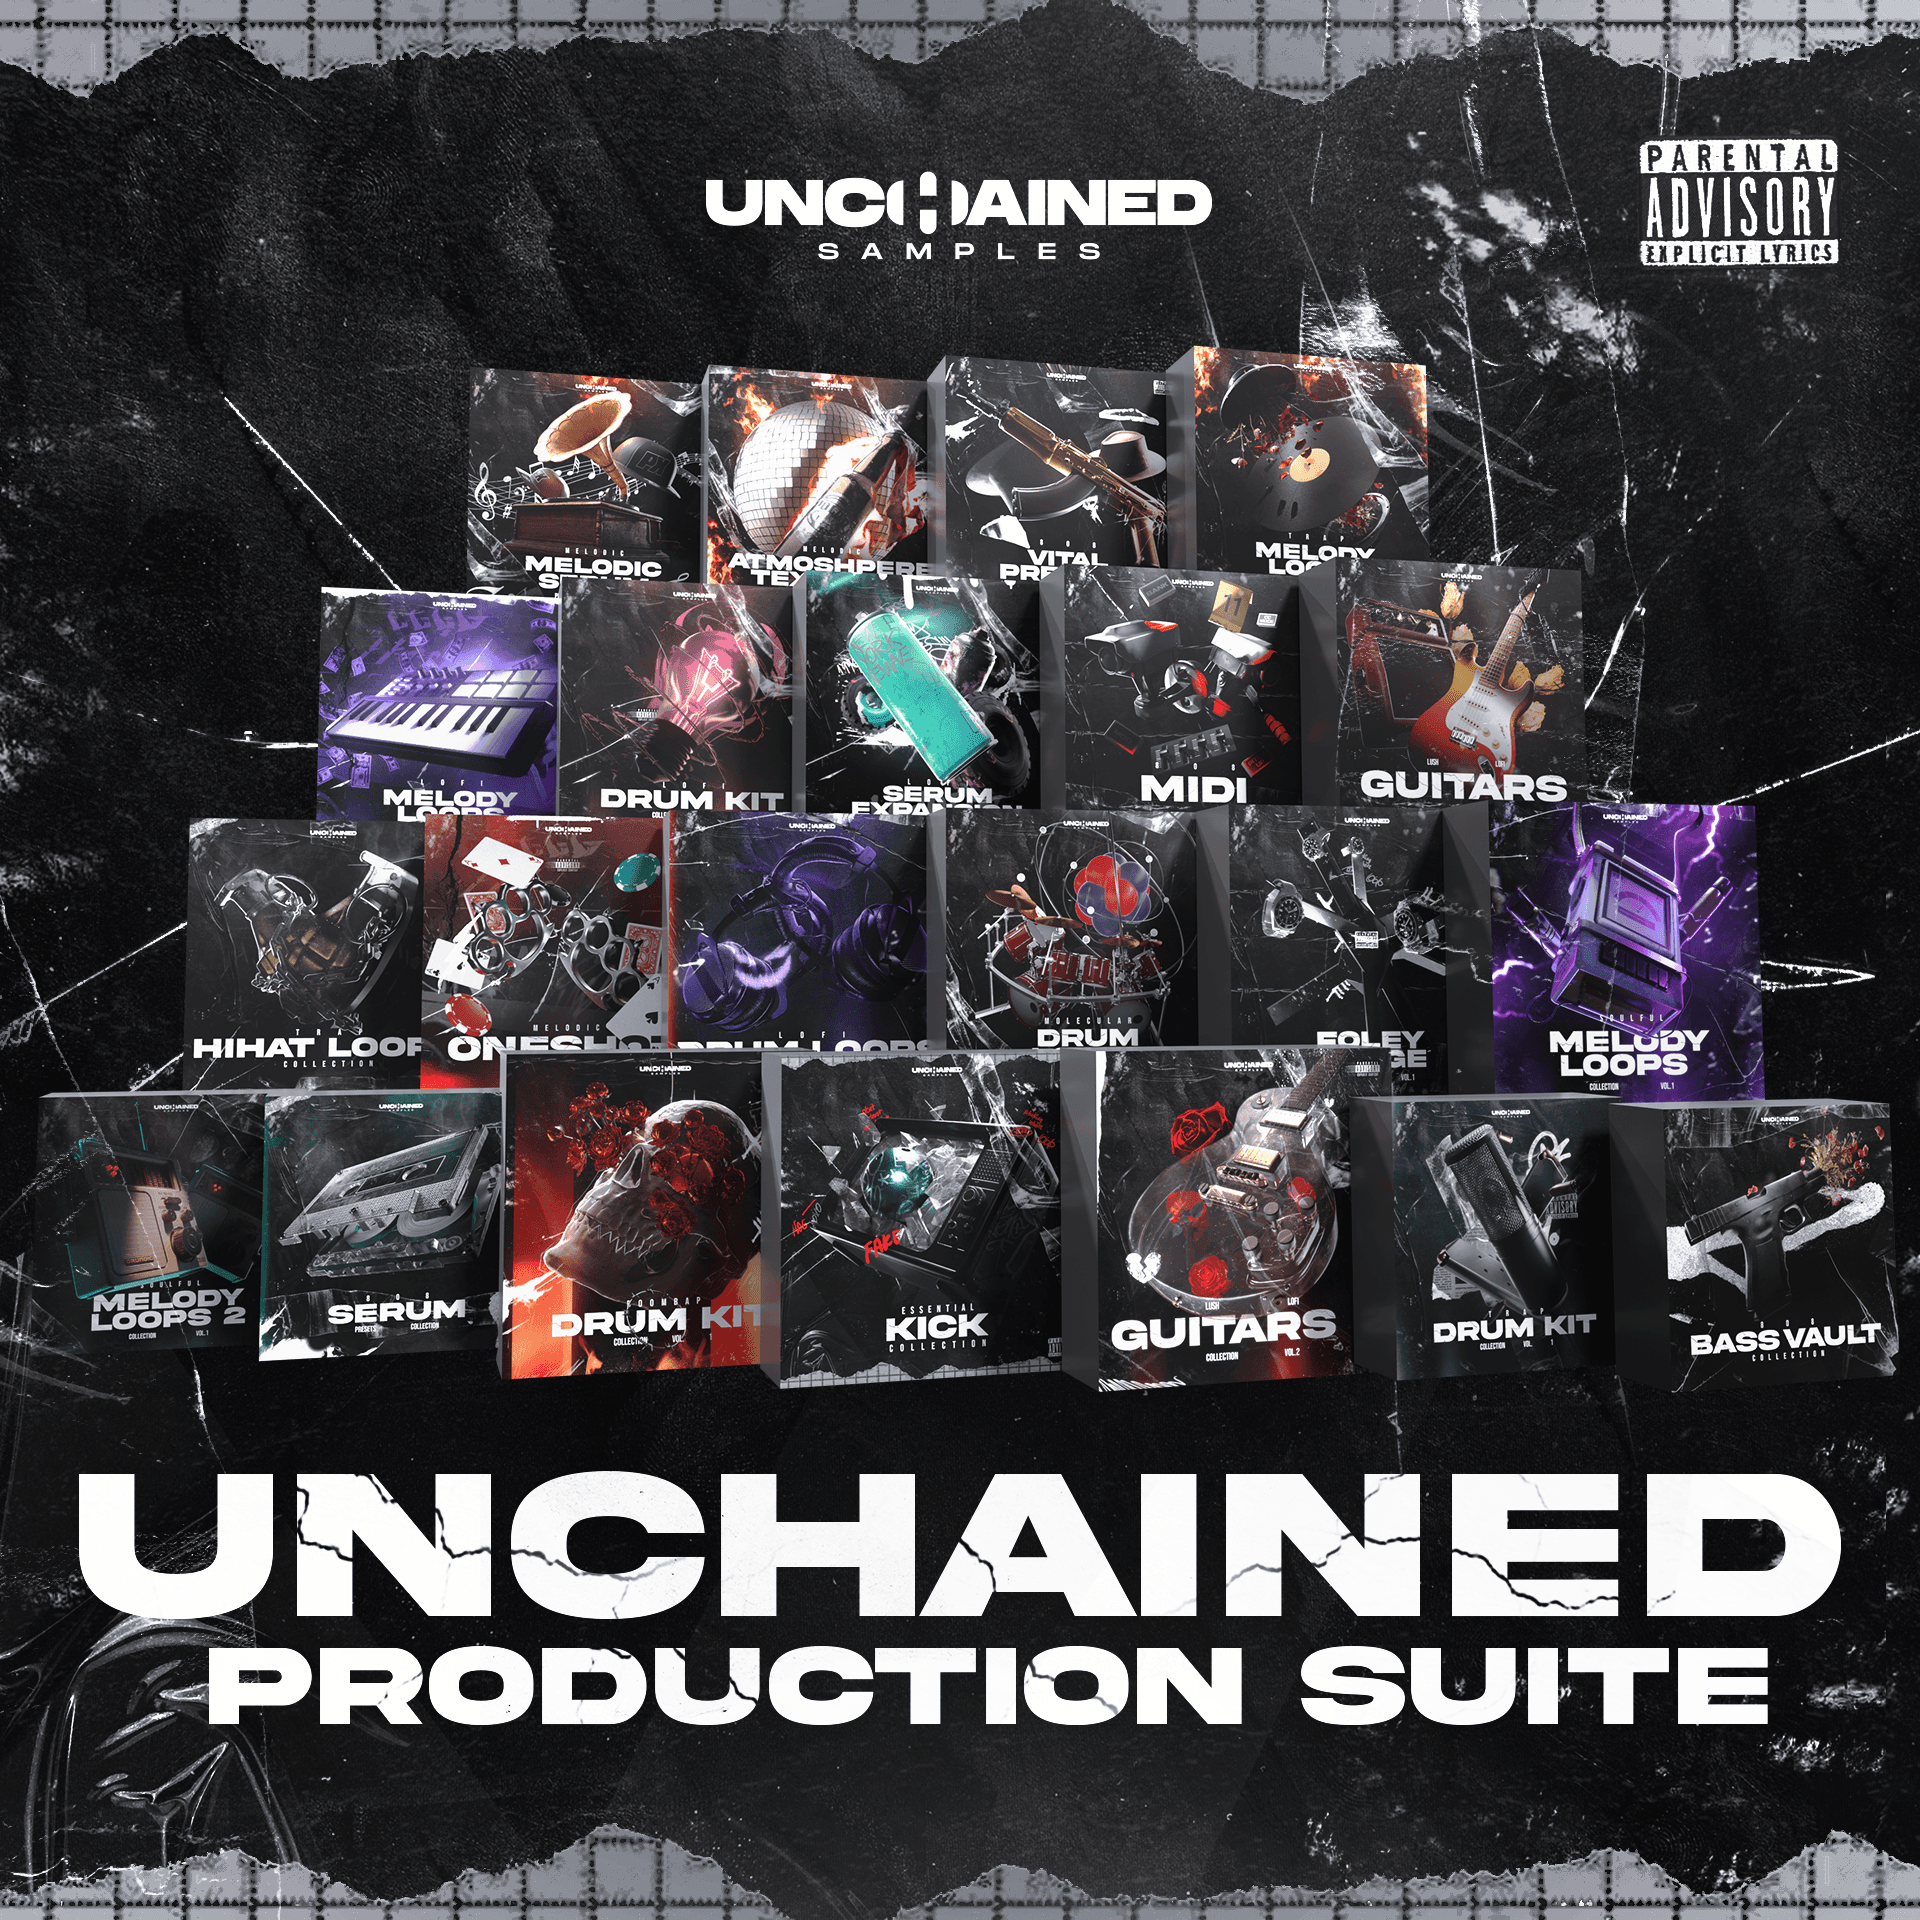 Unchained Production Suite - Unchained Samples